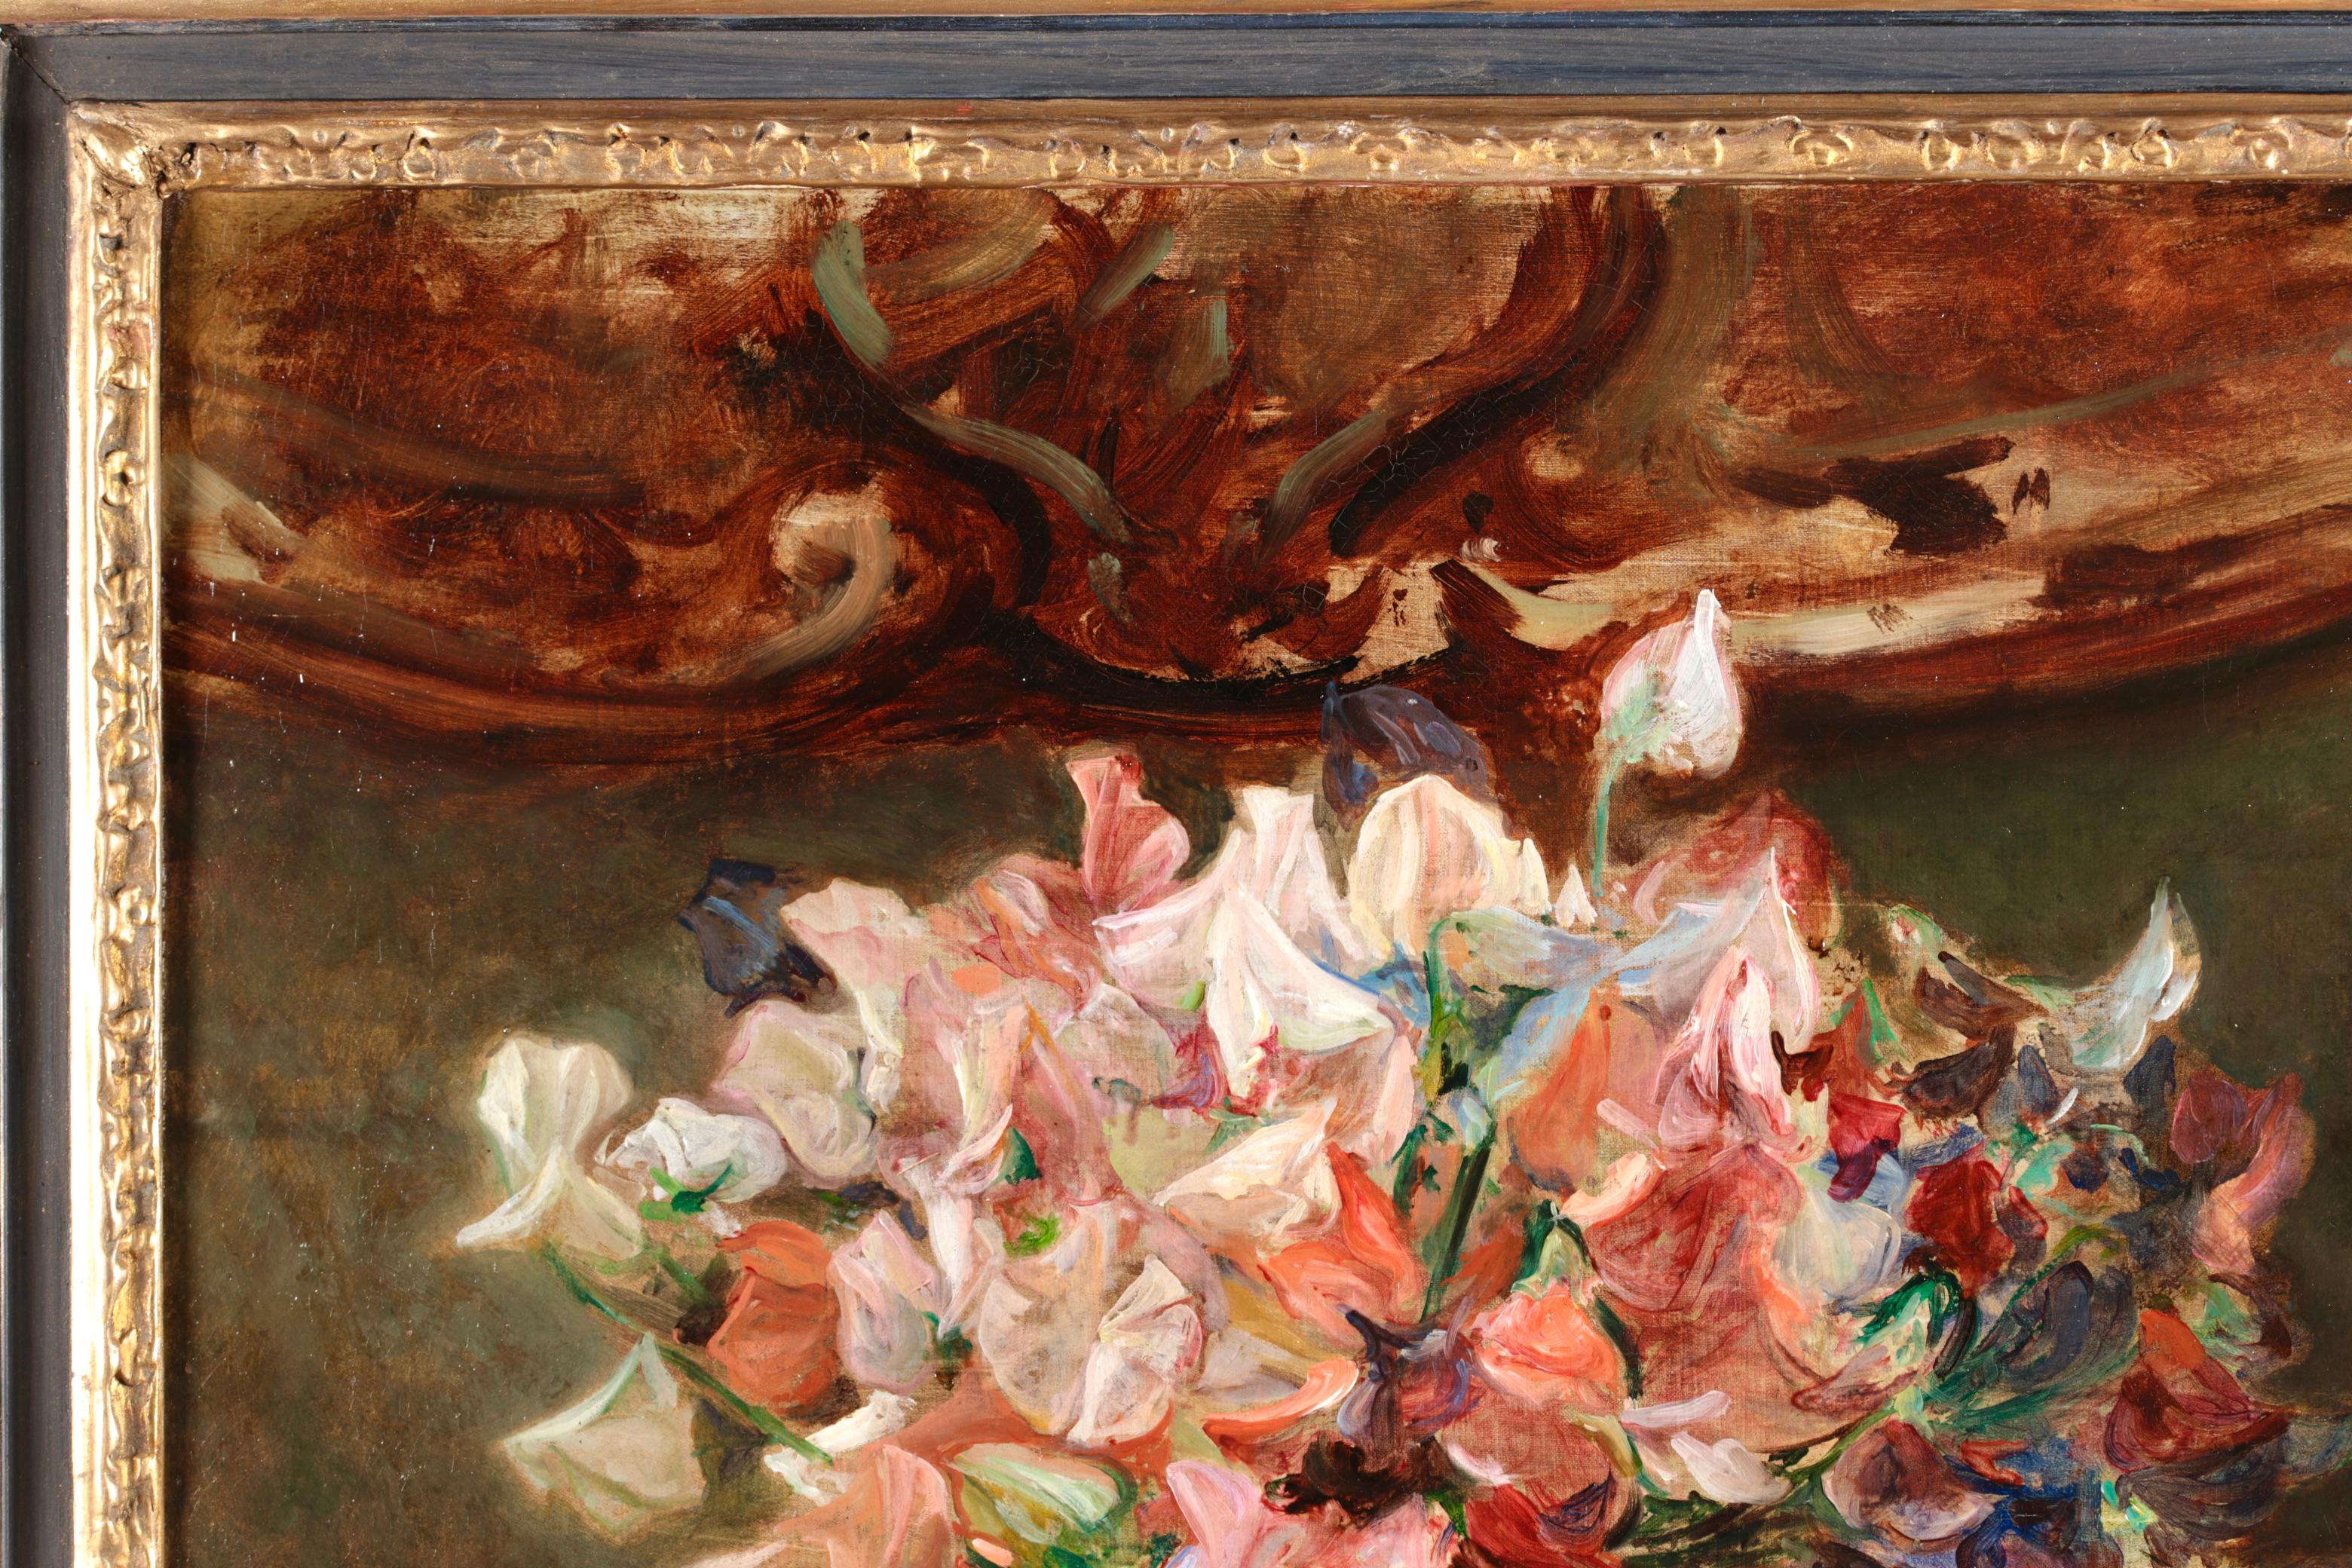 Signed post impressionist still life oil on canvas circa 1895 by French painter Jacques-Emile Blanche. The work depicts a ceramic vase filled with white and pink sweet pea flowers, placed below an ornate frame.

Signature:
Signed twice lower right